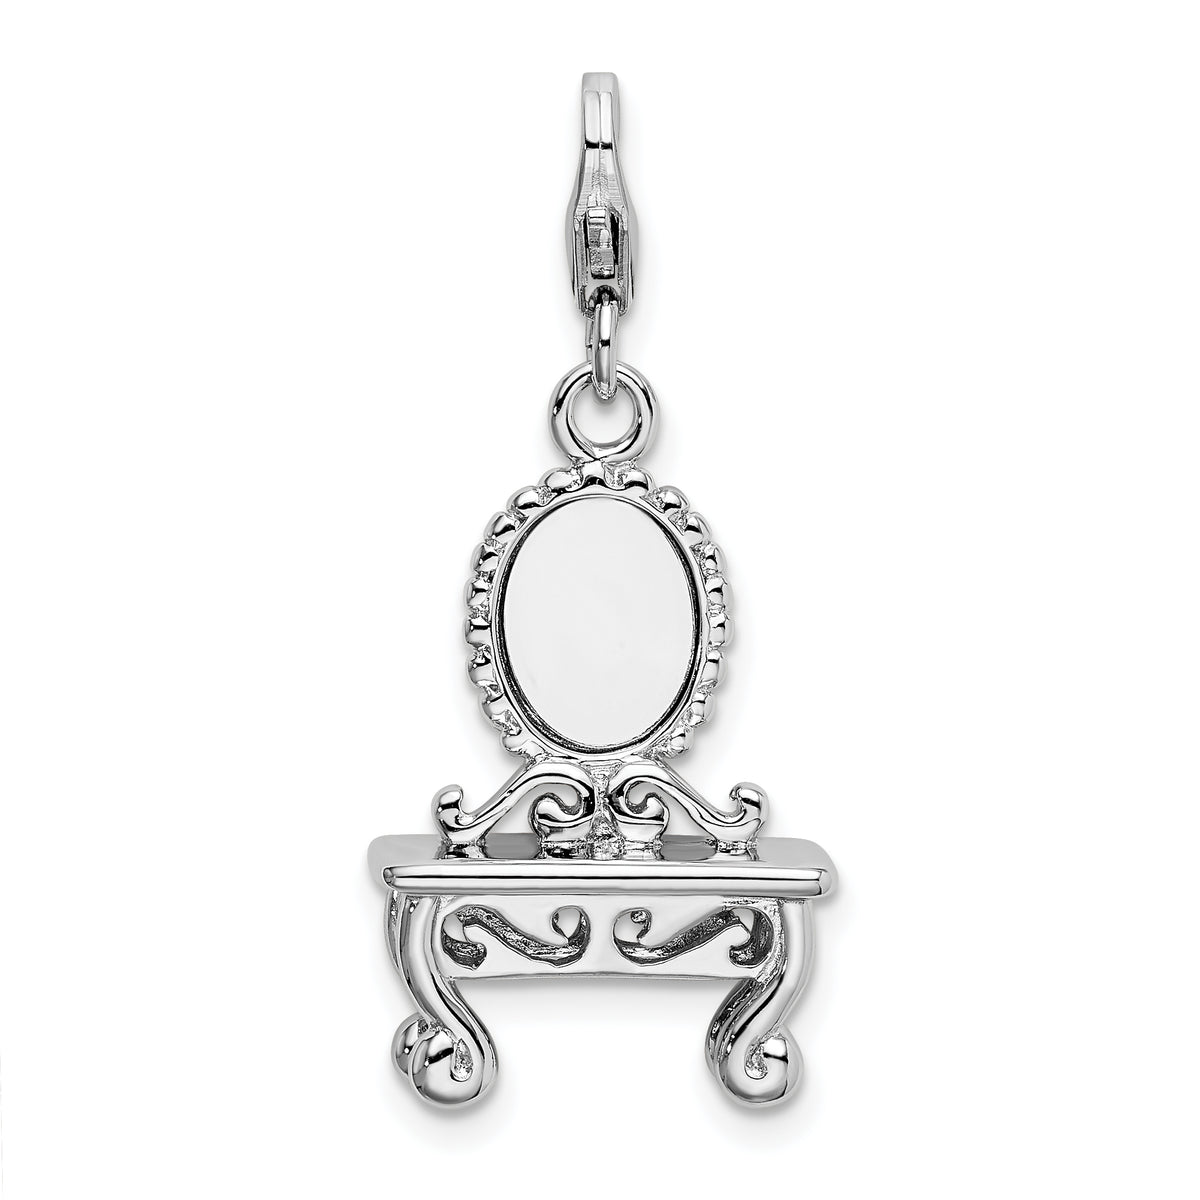 Amore La Vita Sterling Silver Rhodium-plated Polished 3-D Vanity Charm with Fancy Lobster Clasp